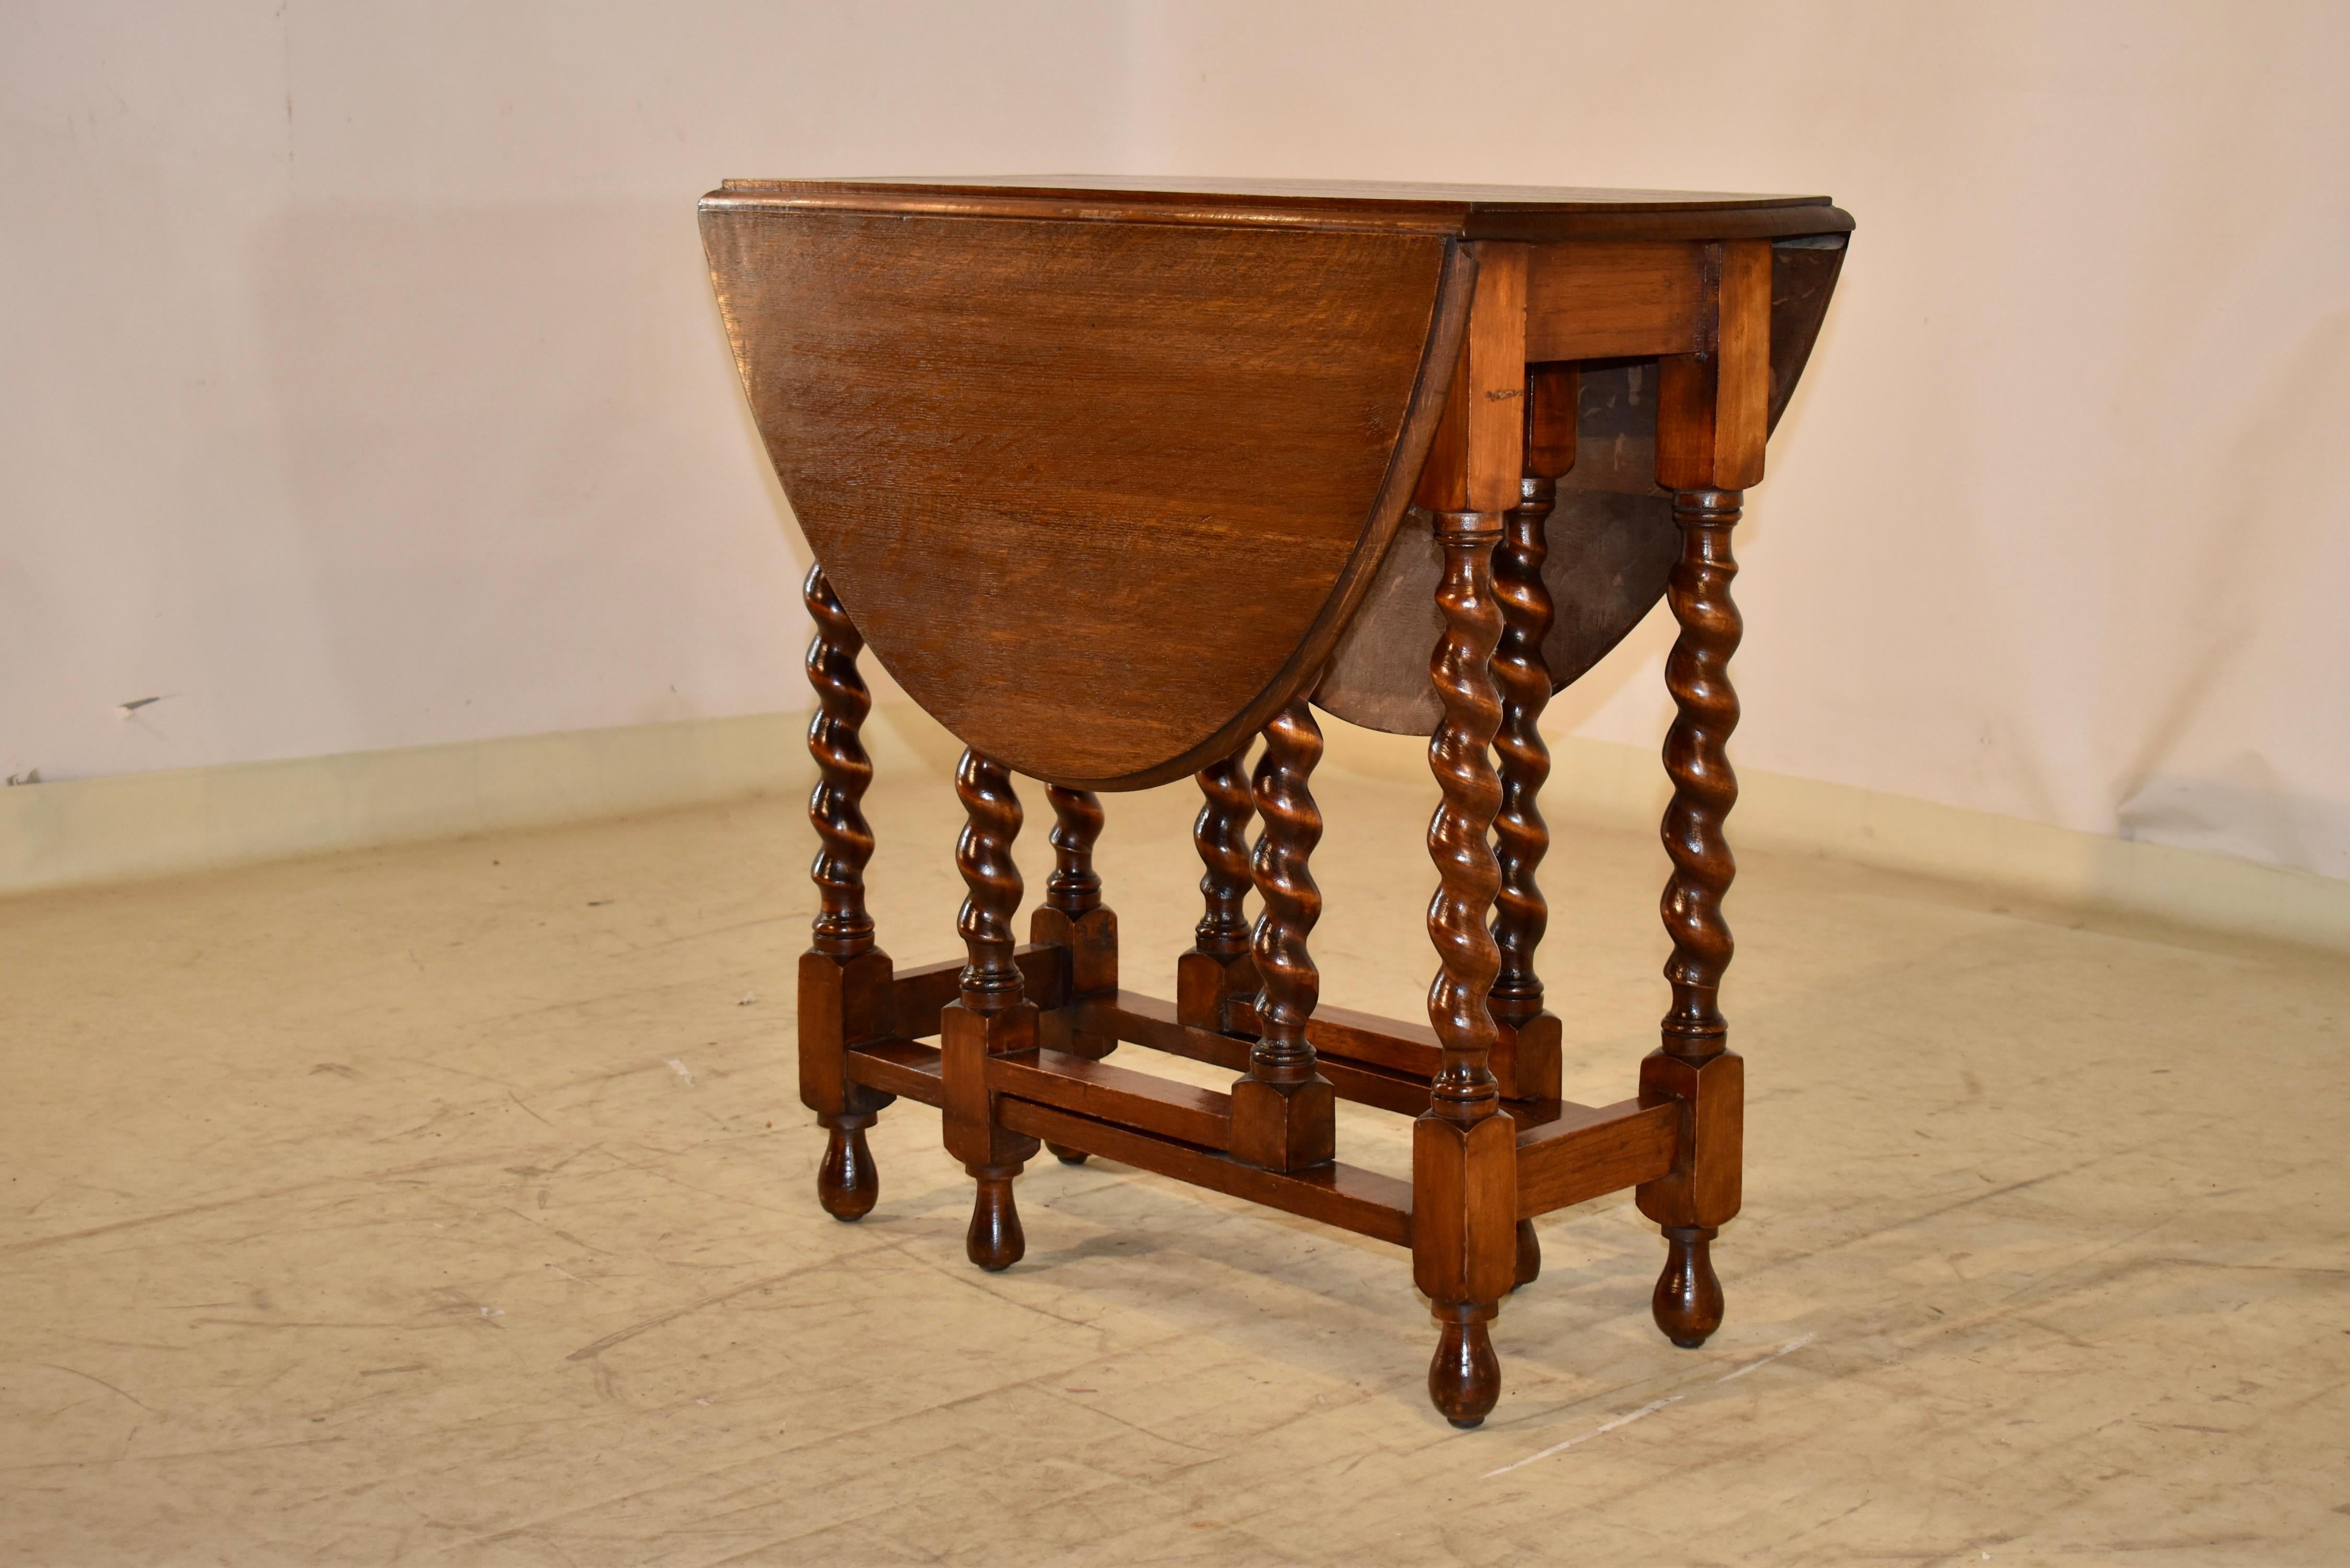 Period Edwardian oak side table from England with a beveled edge around the top.  the top is supported on a simple apron and hand turned barley twist legs and gates.  When the top is open, it measures 41.25 inches in length by 29.5 inches in width. 